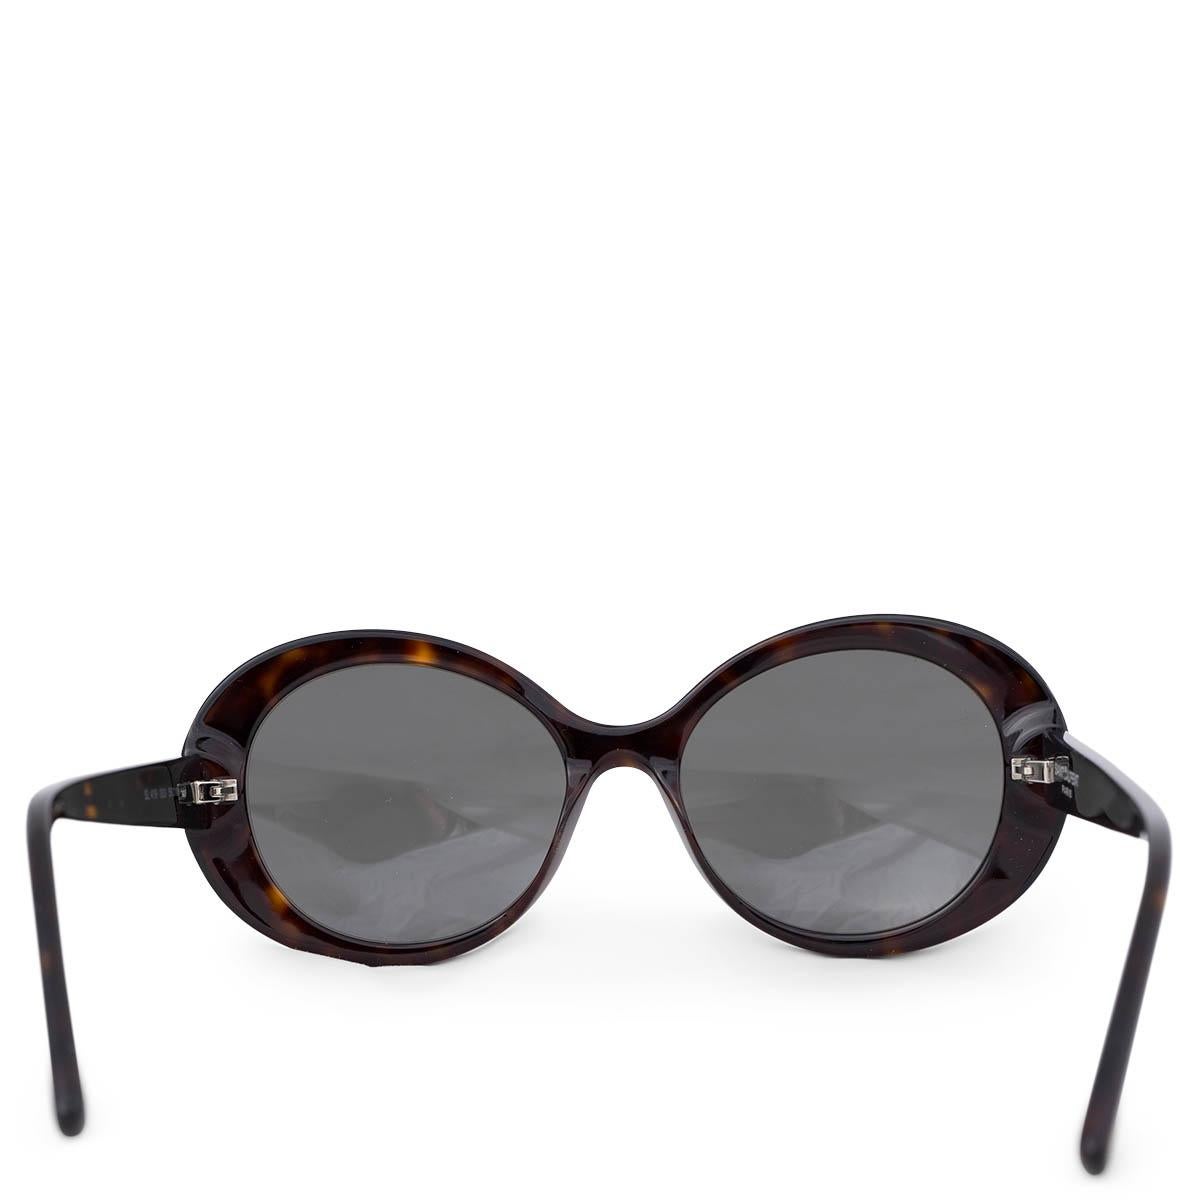 SAINT LAURENT brown tortoise OVAL Sunglasses SL419 In Excellent Condition For Sale In Zürich, CH